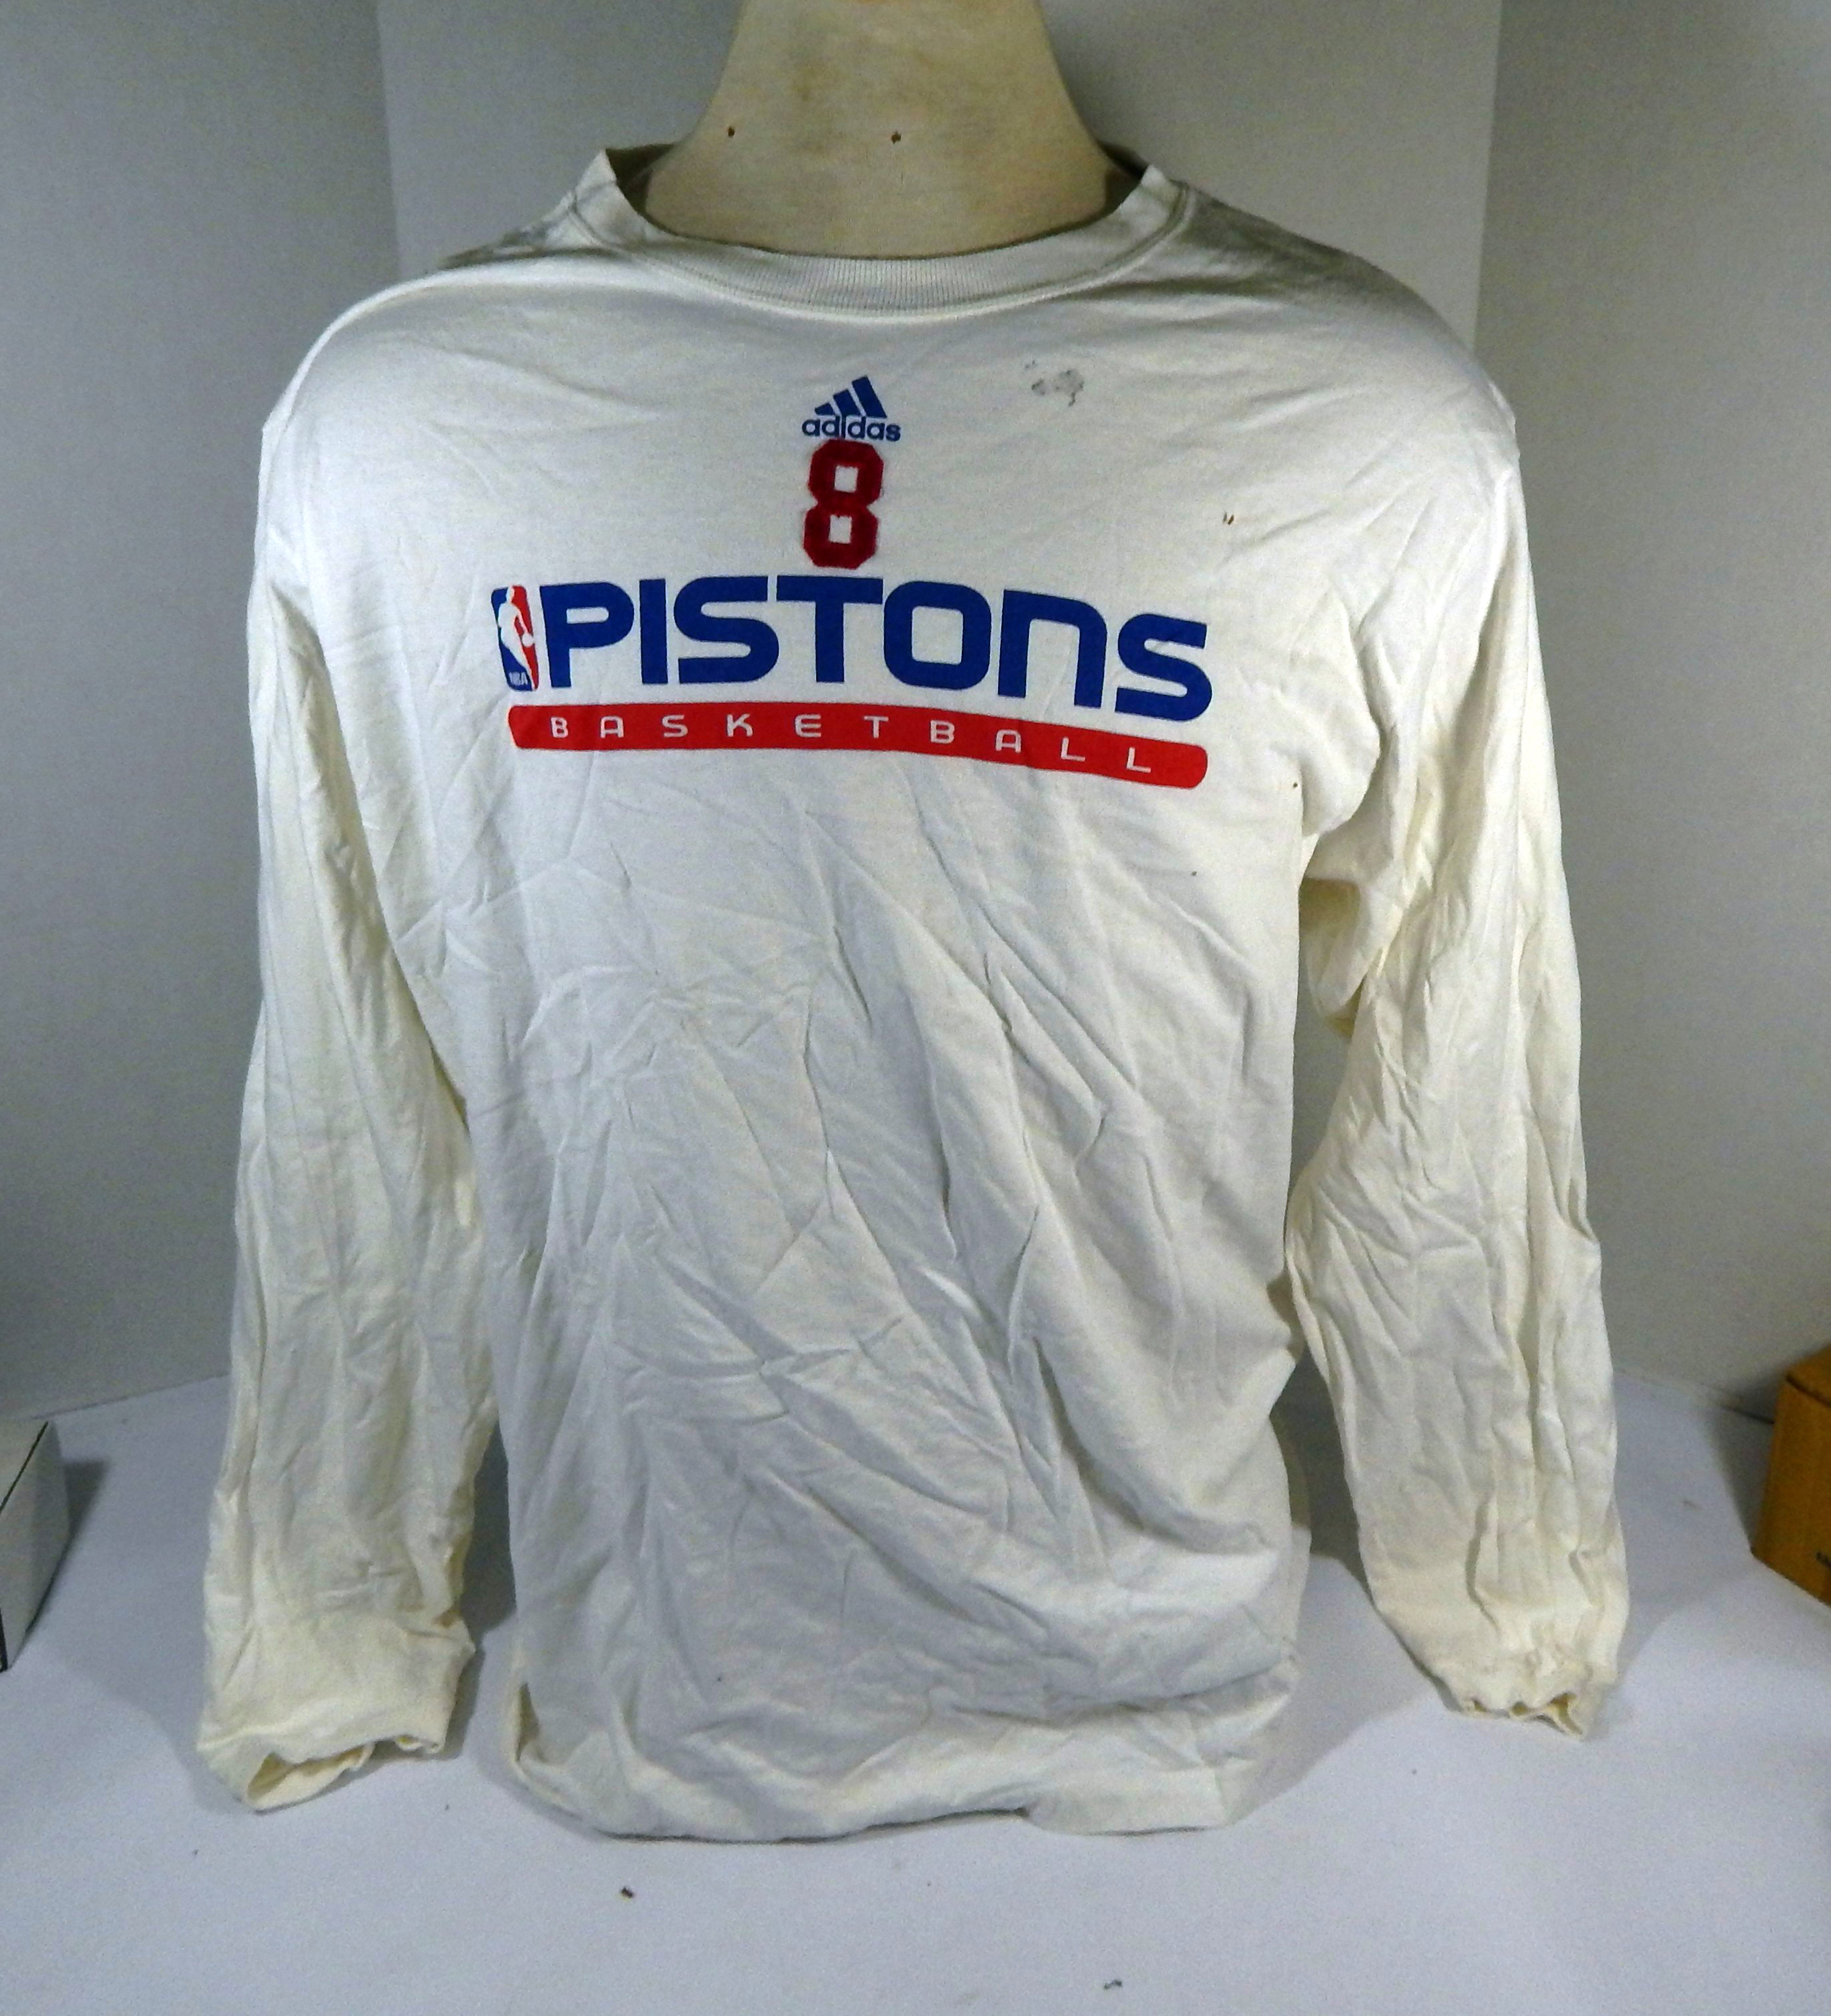 Detroit Pistons #8 Game Used White Warm Up Shirt 2XL DP42870